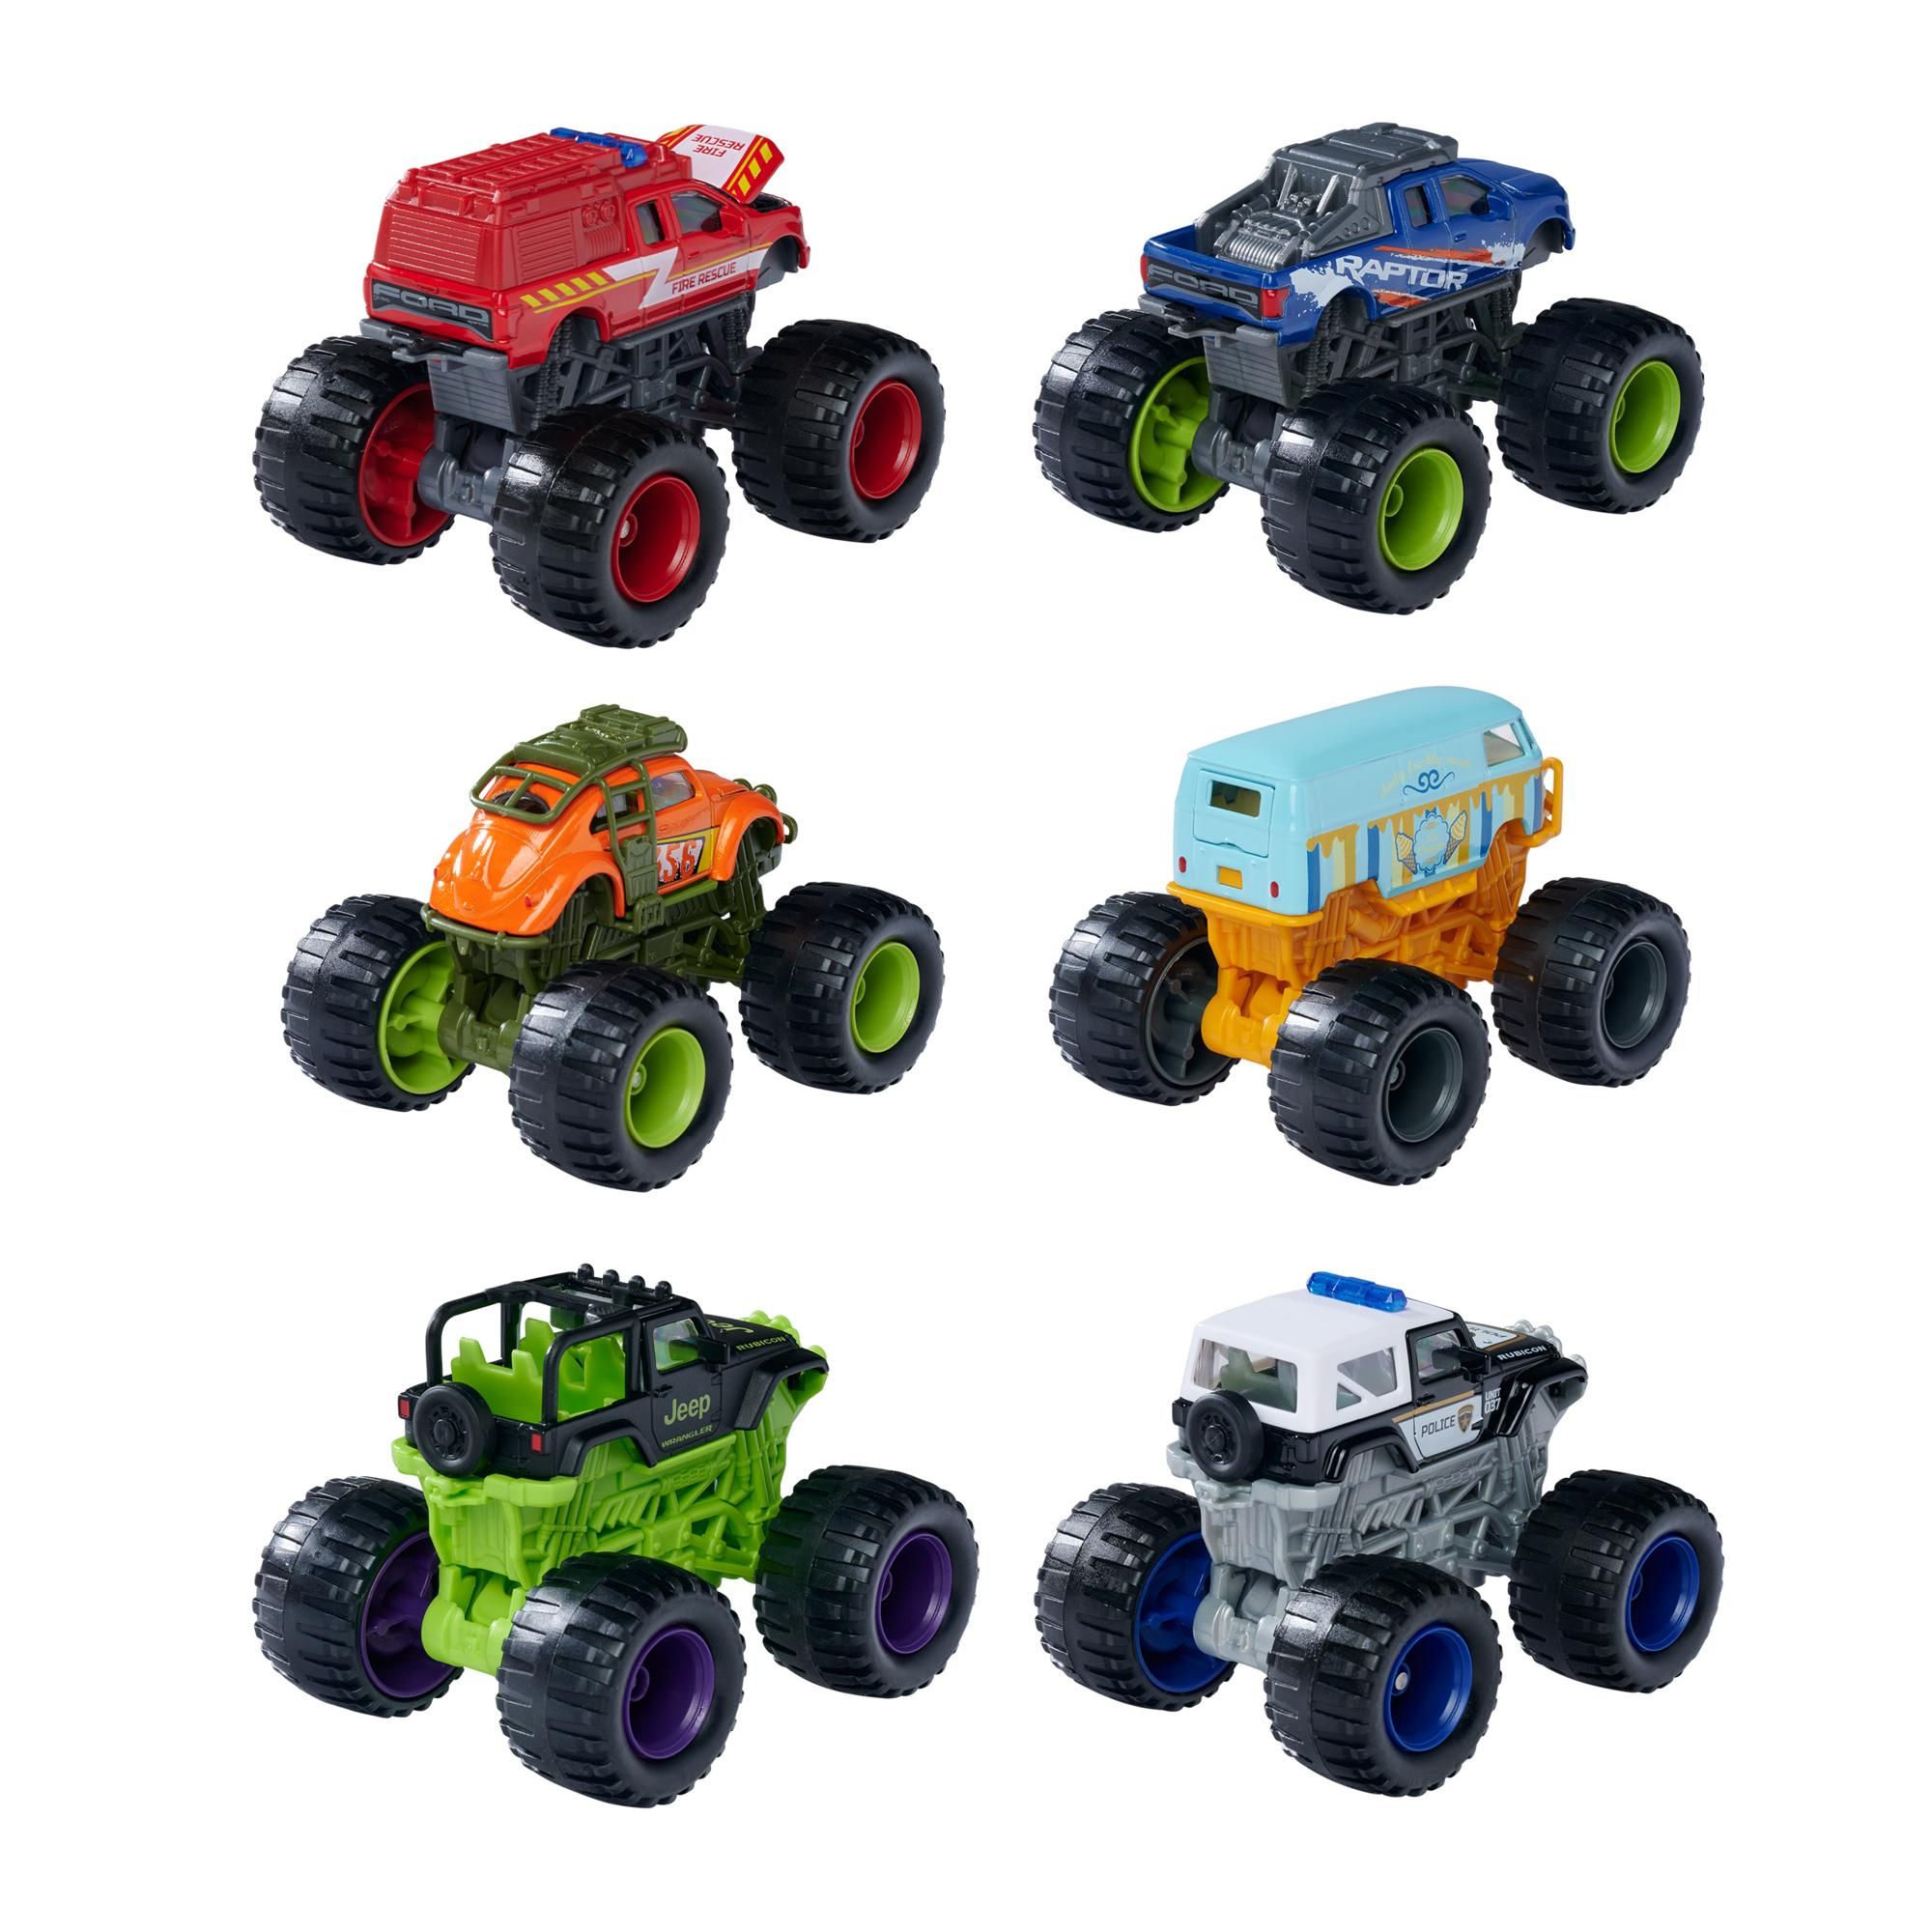 Majorette Monster Rockerz Series - Design & Style May Vary, Only 1 Model Included